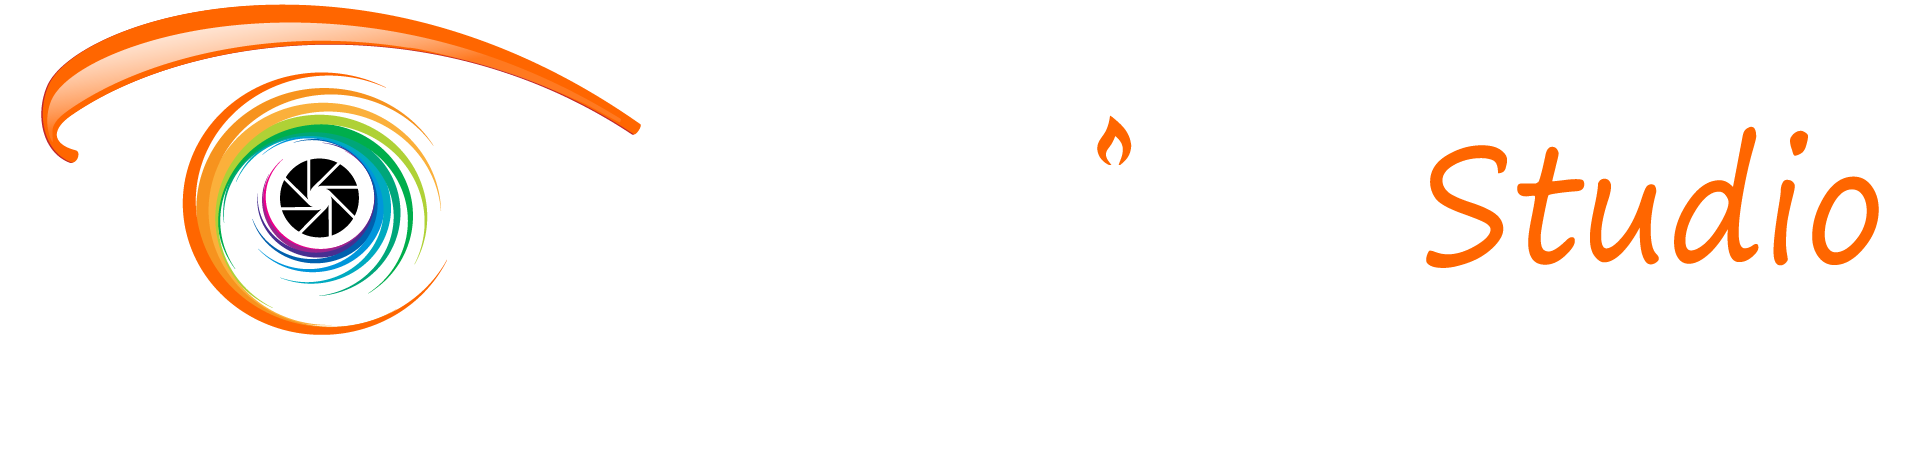 CandleLight Studio Logo - Capturing Indian Wedding Moments with Excellence